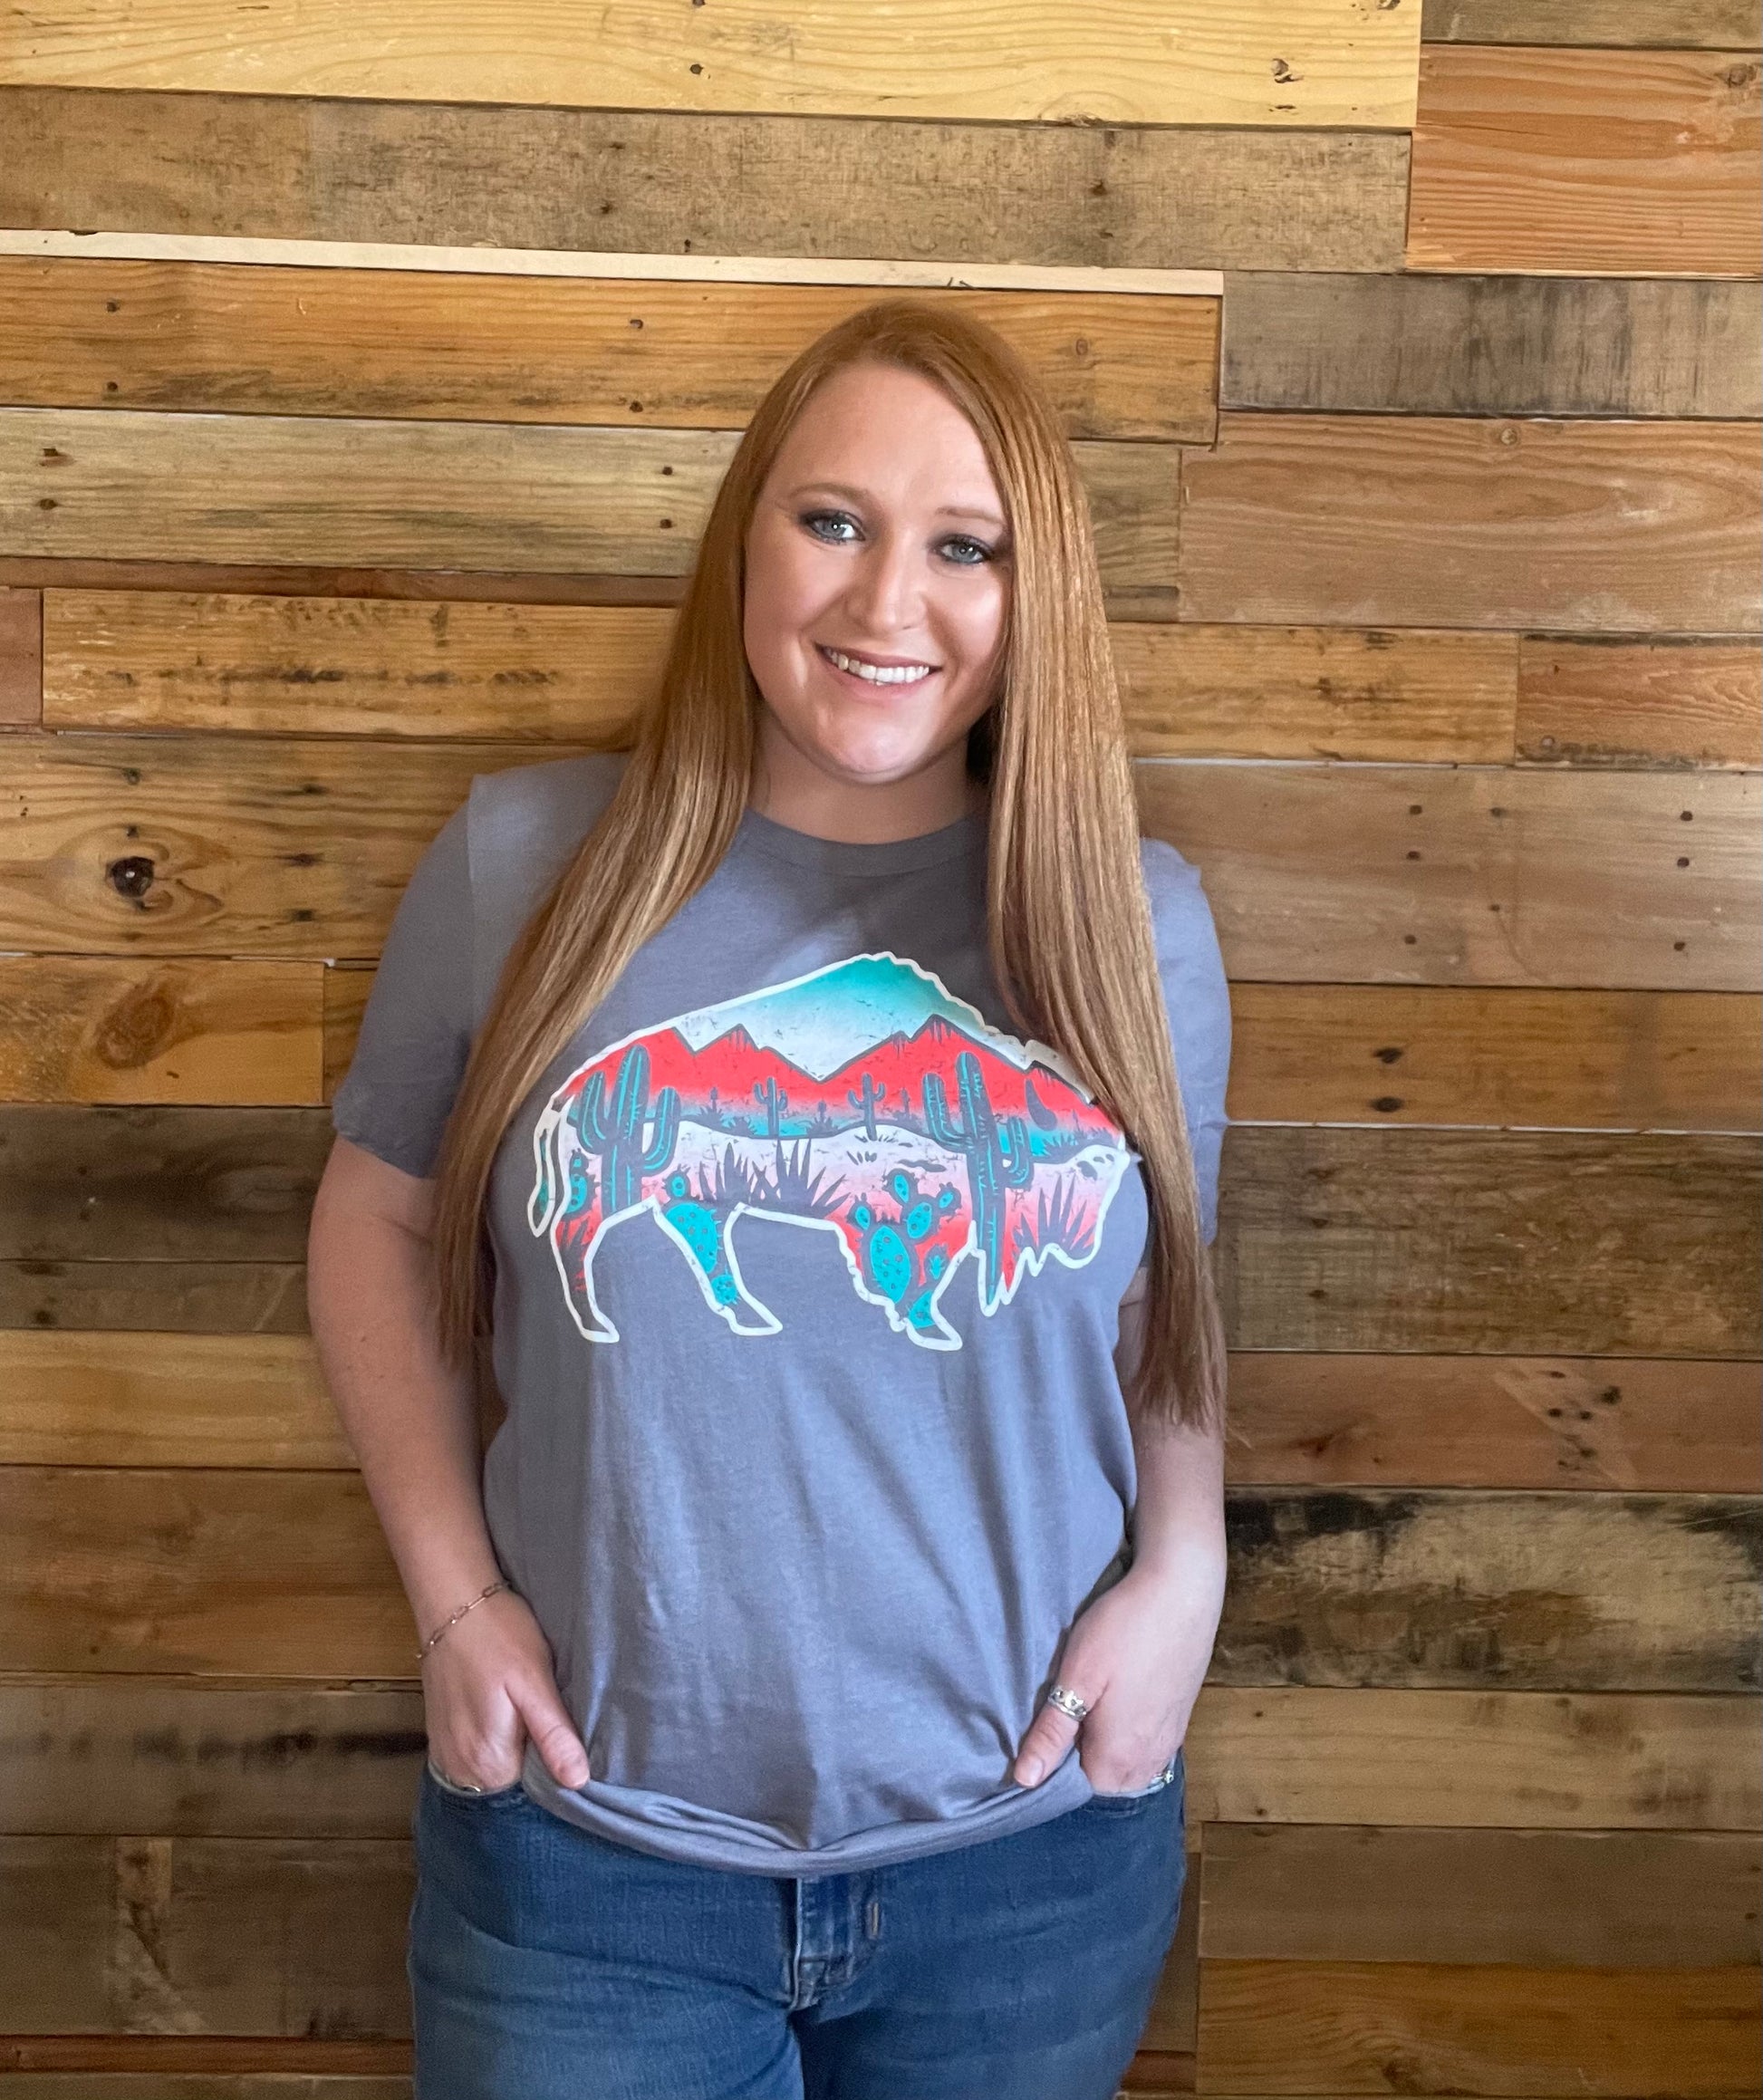 Model wearing grey shirt with Buffalo filled with colorful desert scenery in large 